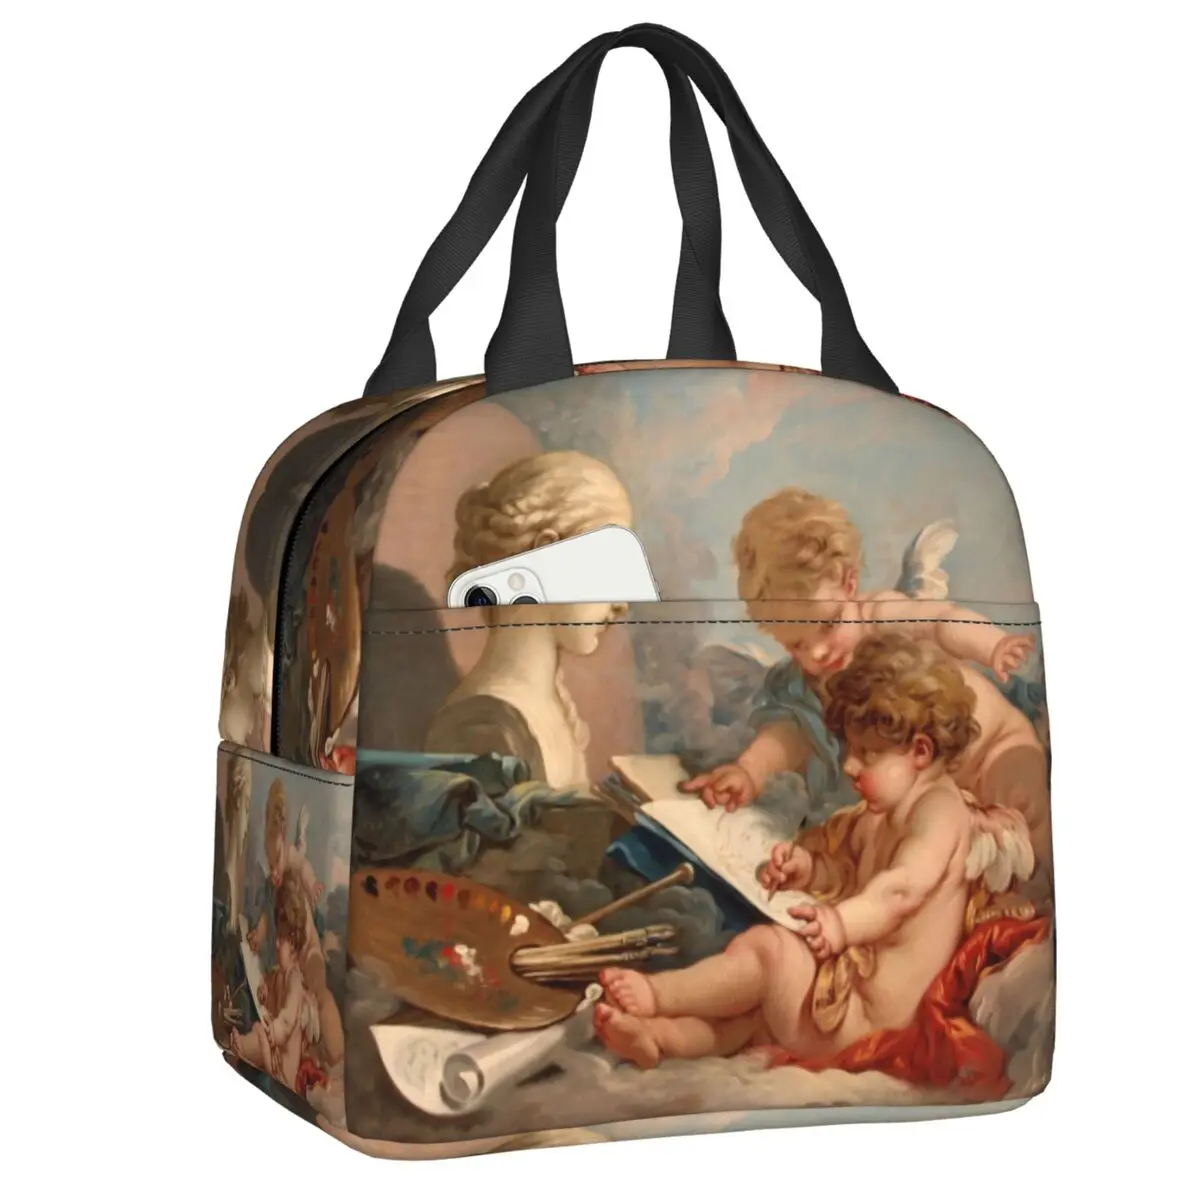 

Renaissance Angel Cherub Insulated Lunch Bag for Women Boucher Rococo Art Portable Warm Cooler Thermal Lunch Bag Container Tote